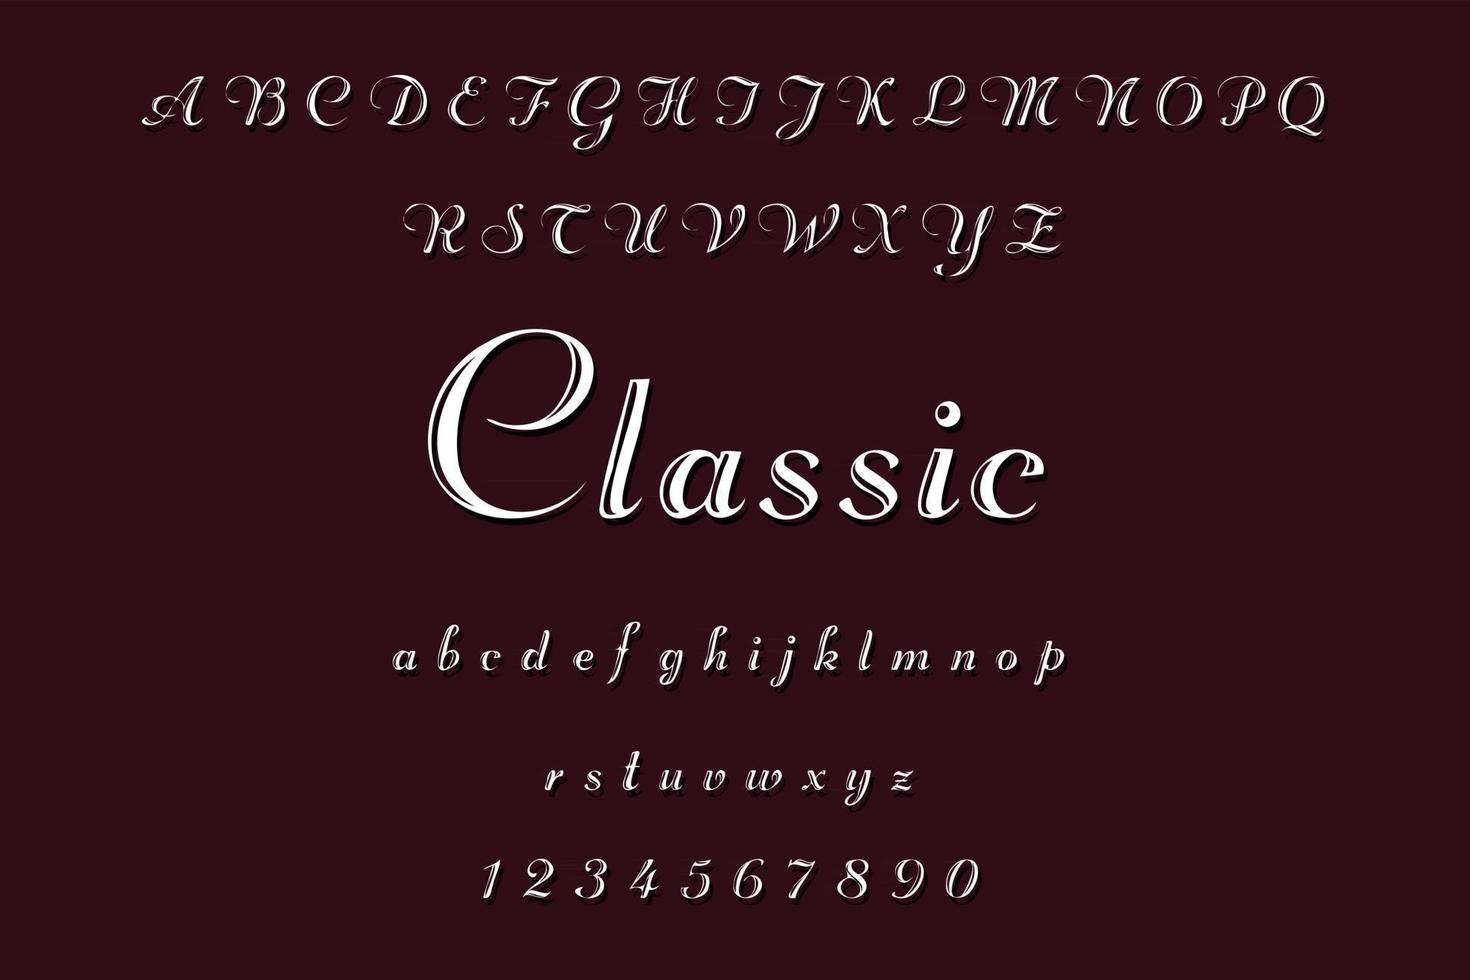 Cool Classic Alphabet Font A to Z vector